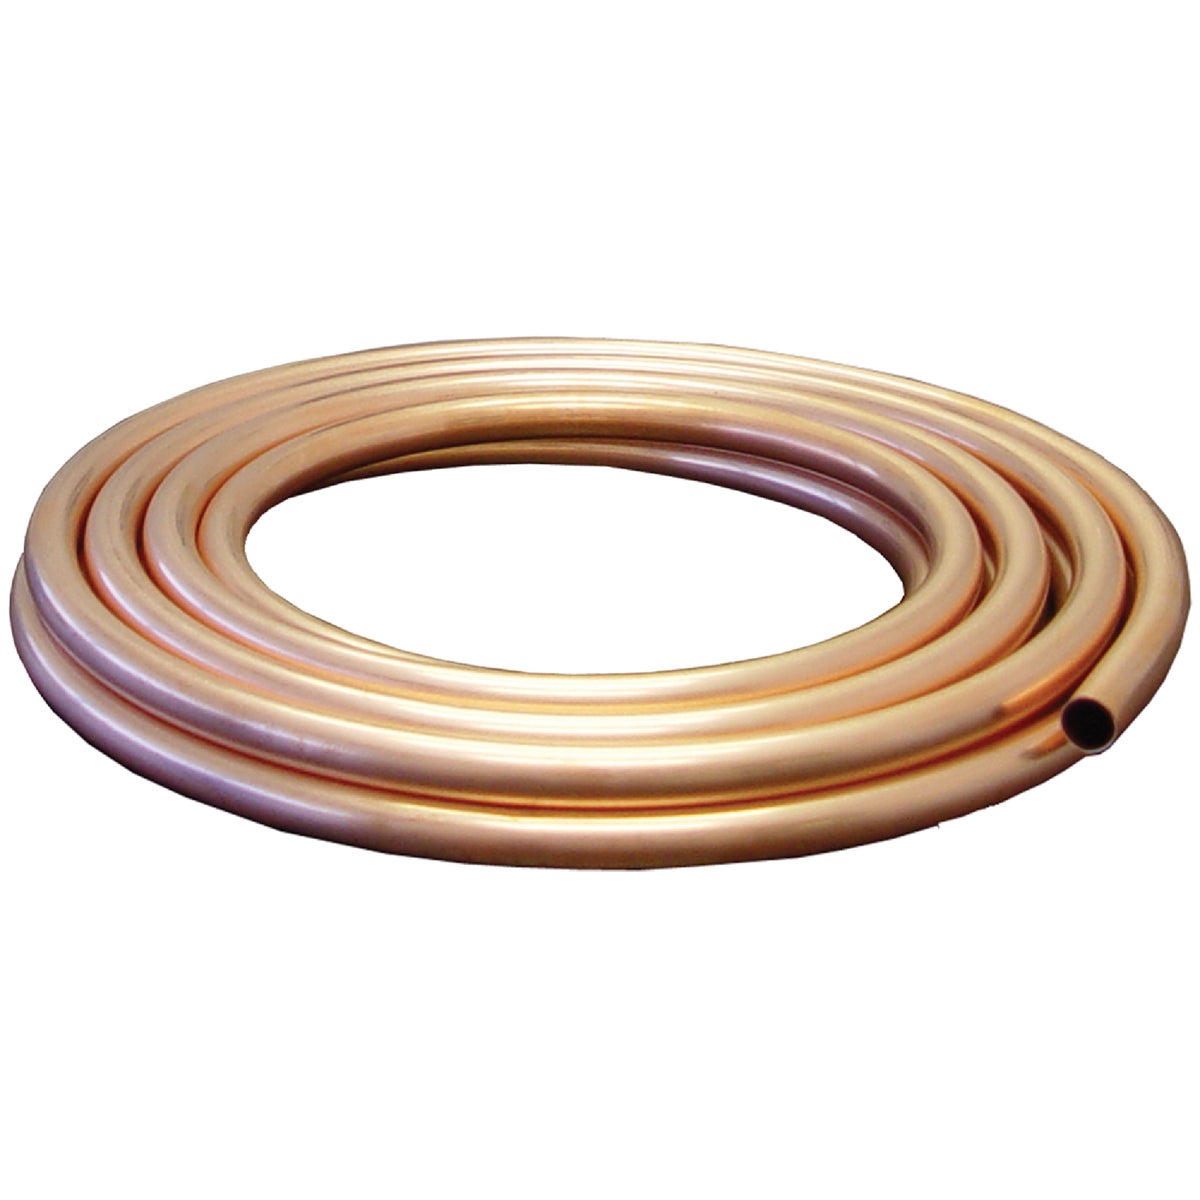 Item 477222, General-purpose utility grade copper tubing for water supply applications, 